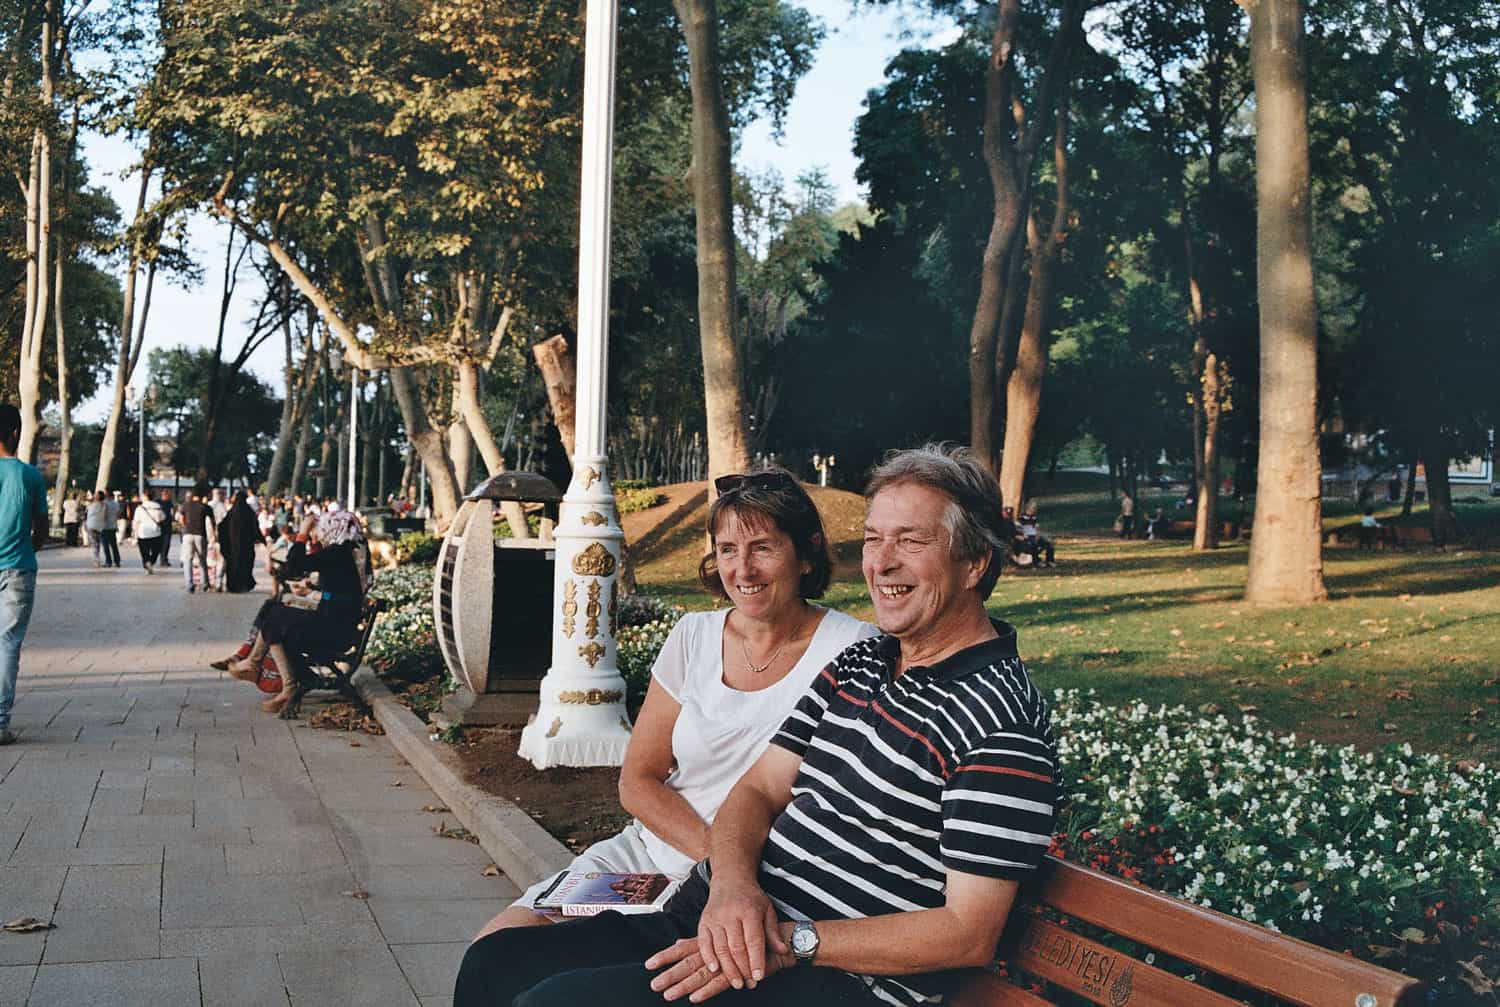 Parents in Istanbul by Charlotte Emms